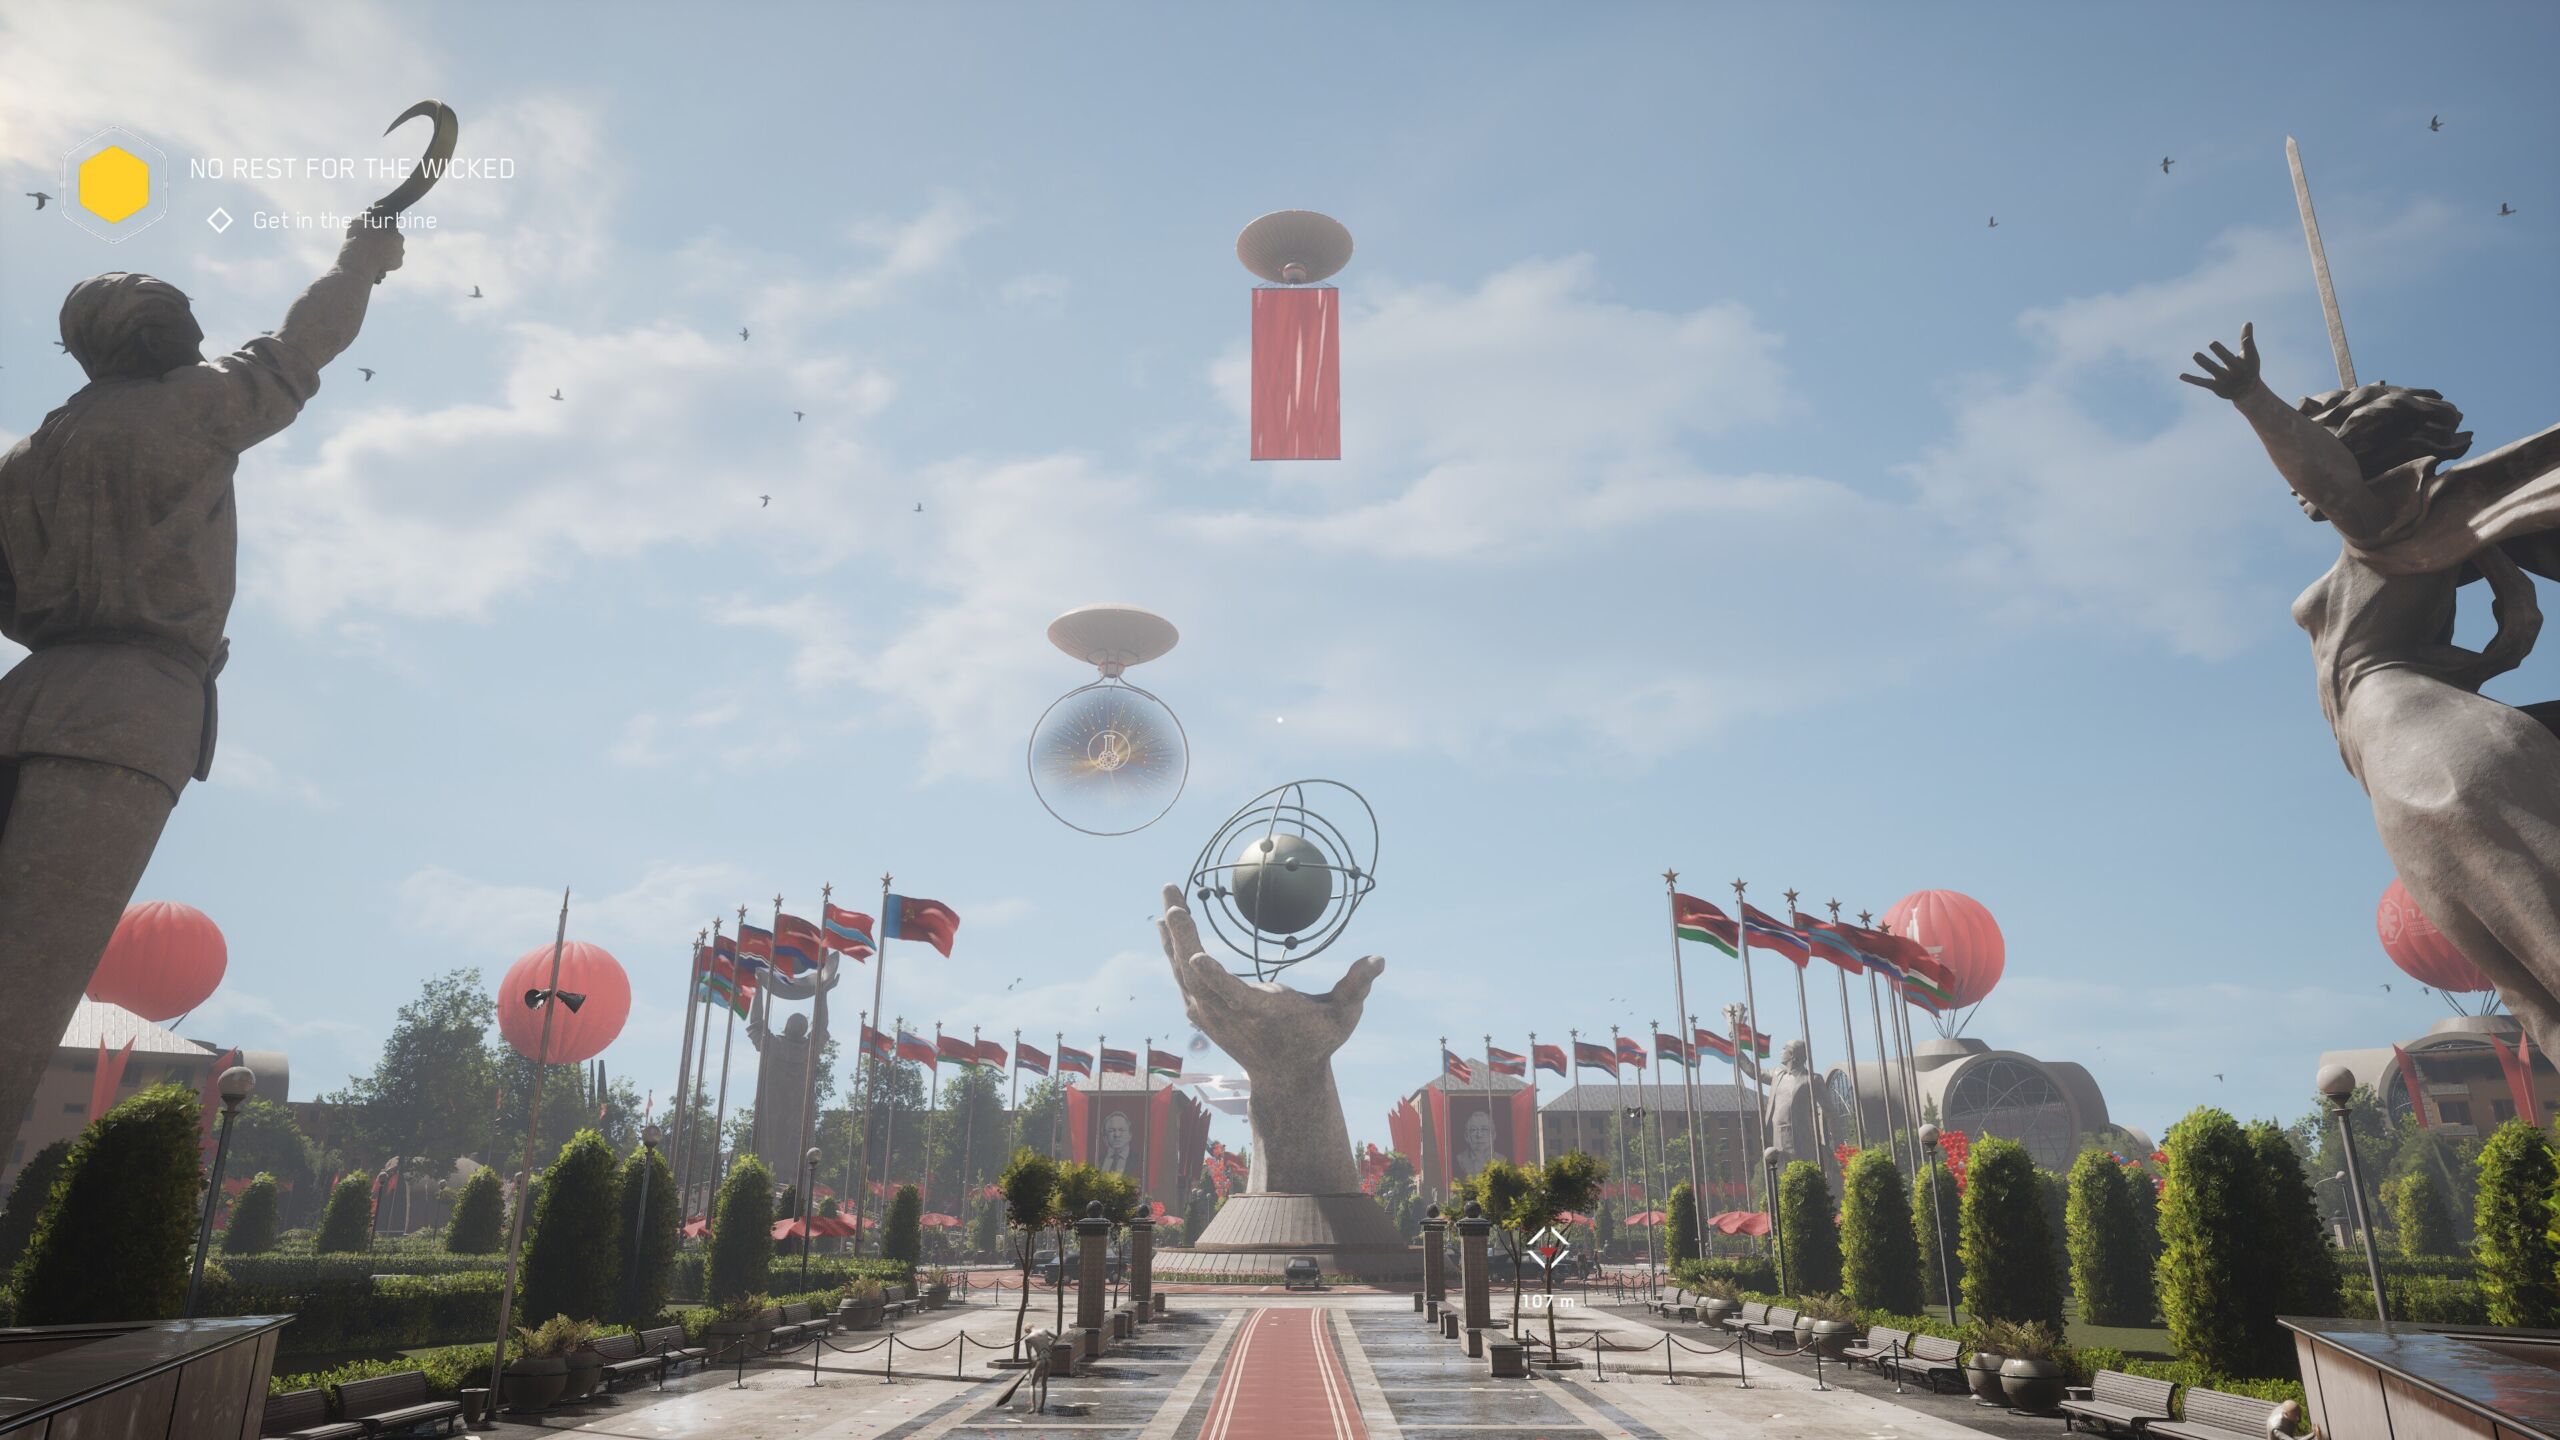 Atomic Heart mods are here